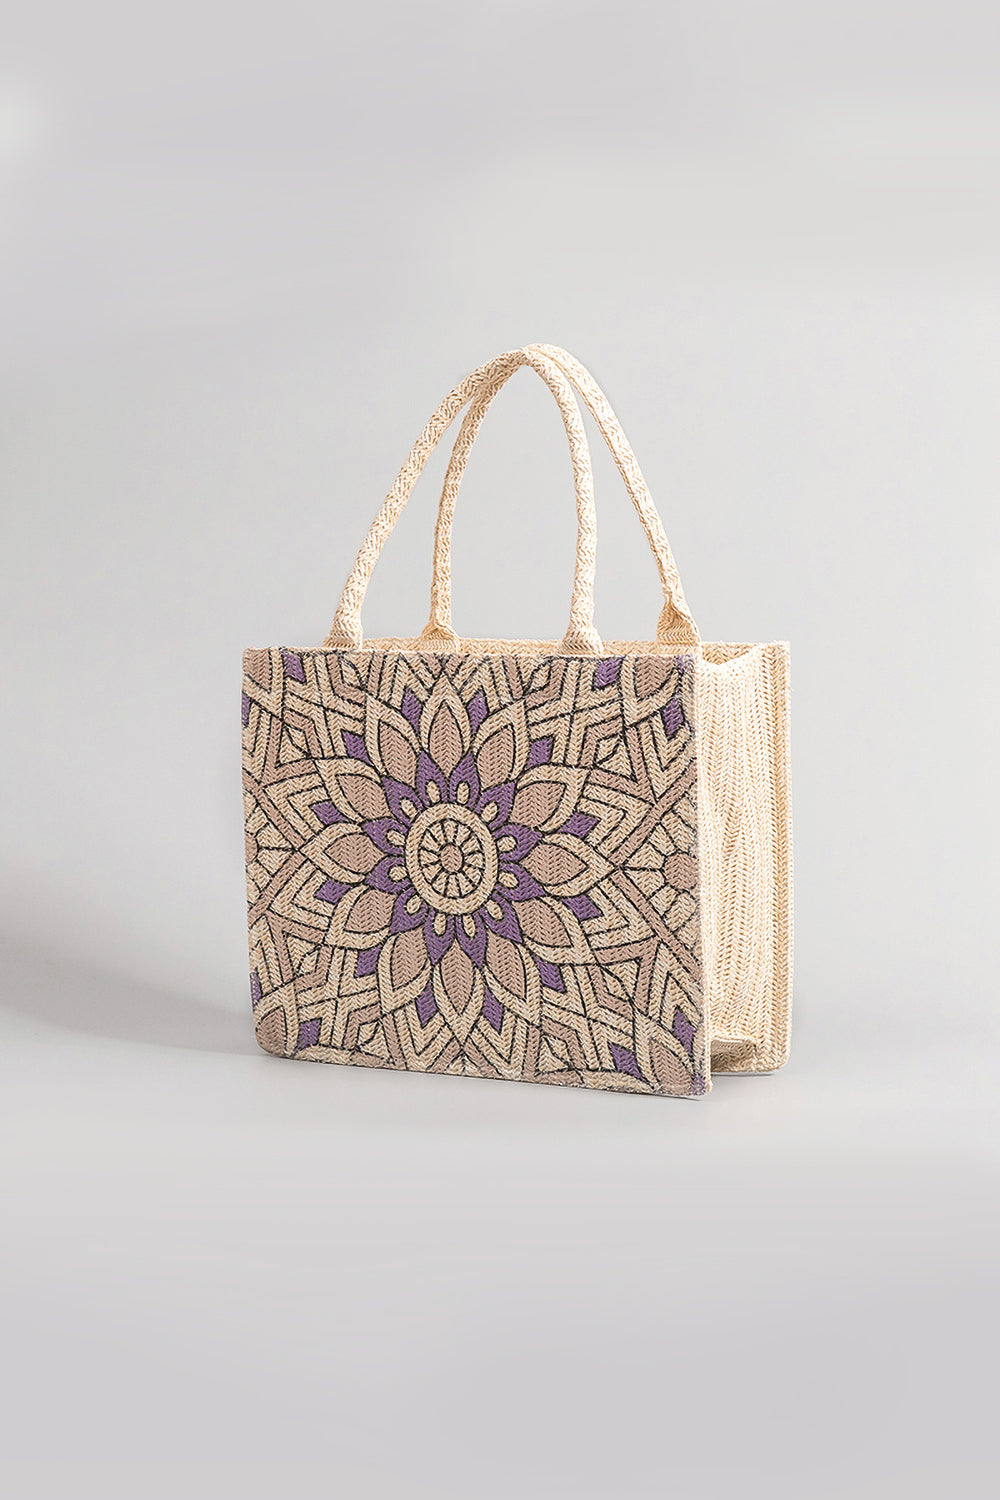 Geometric patterned straw tote bag for everyday use